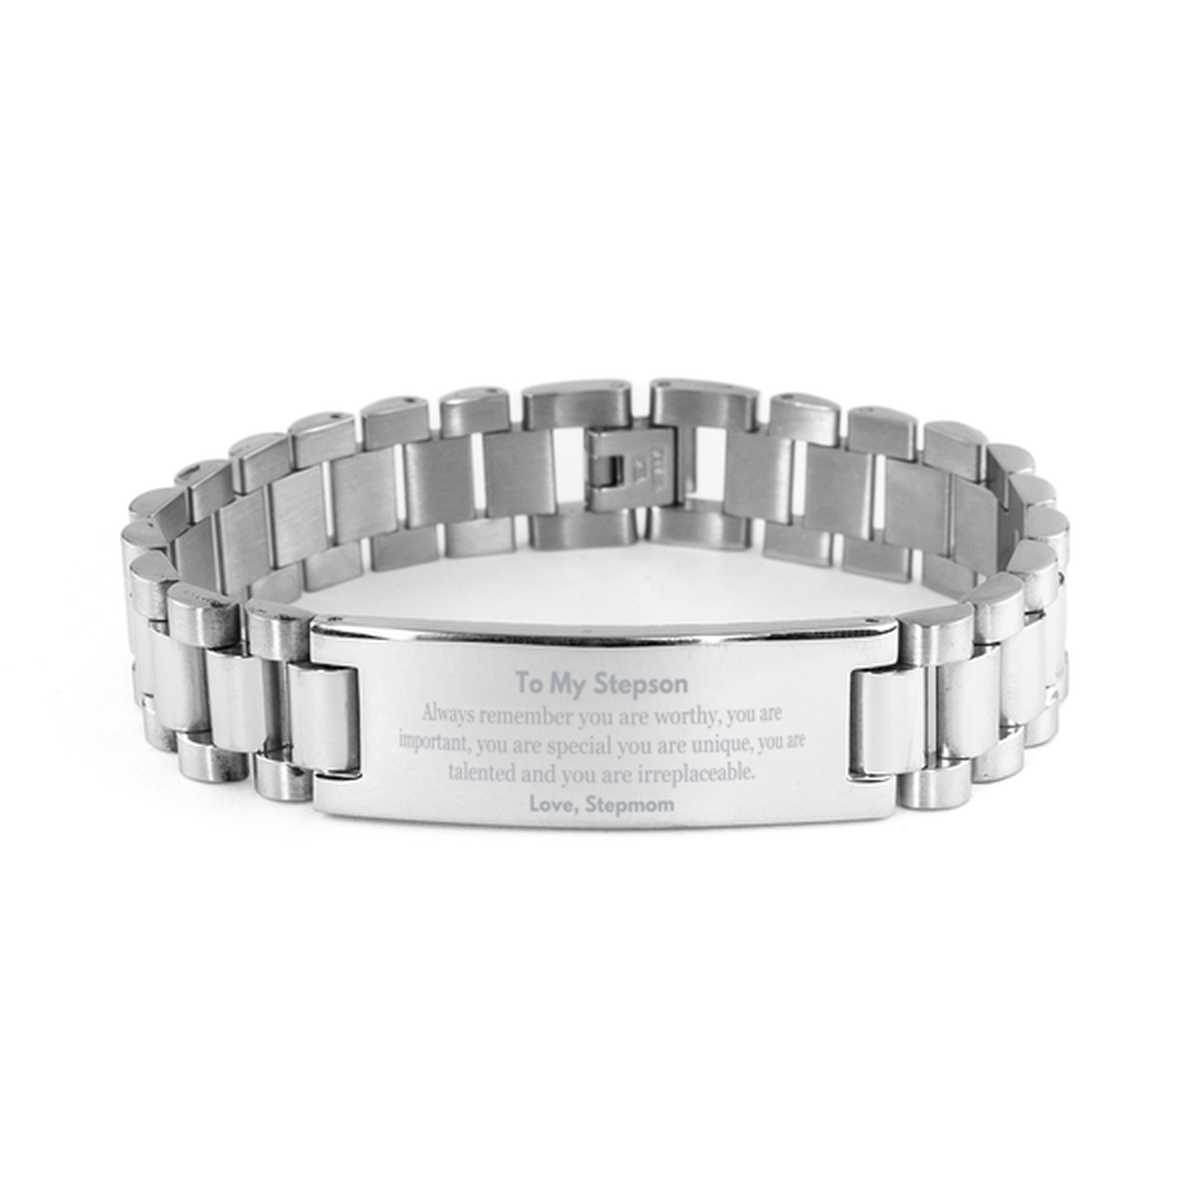 Stepson Birthday Gifts from Stepmom, Inspirational Ladder Stainless Steel Bracelet for Stepson Christmas Graduation Gifts for Stepson Always remember you are worthy, you are important. Love, Stepmom